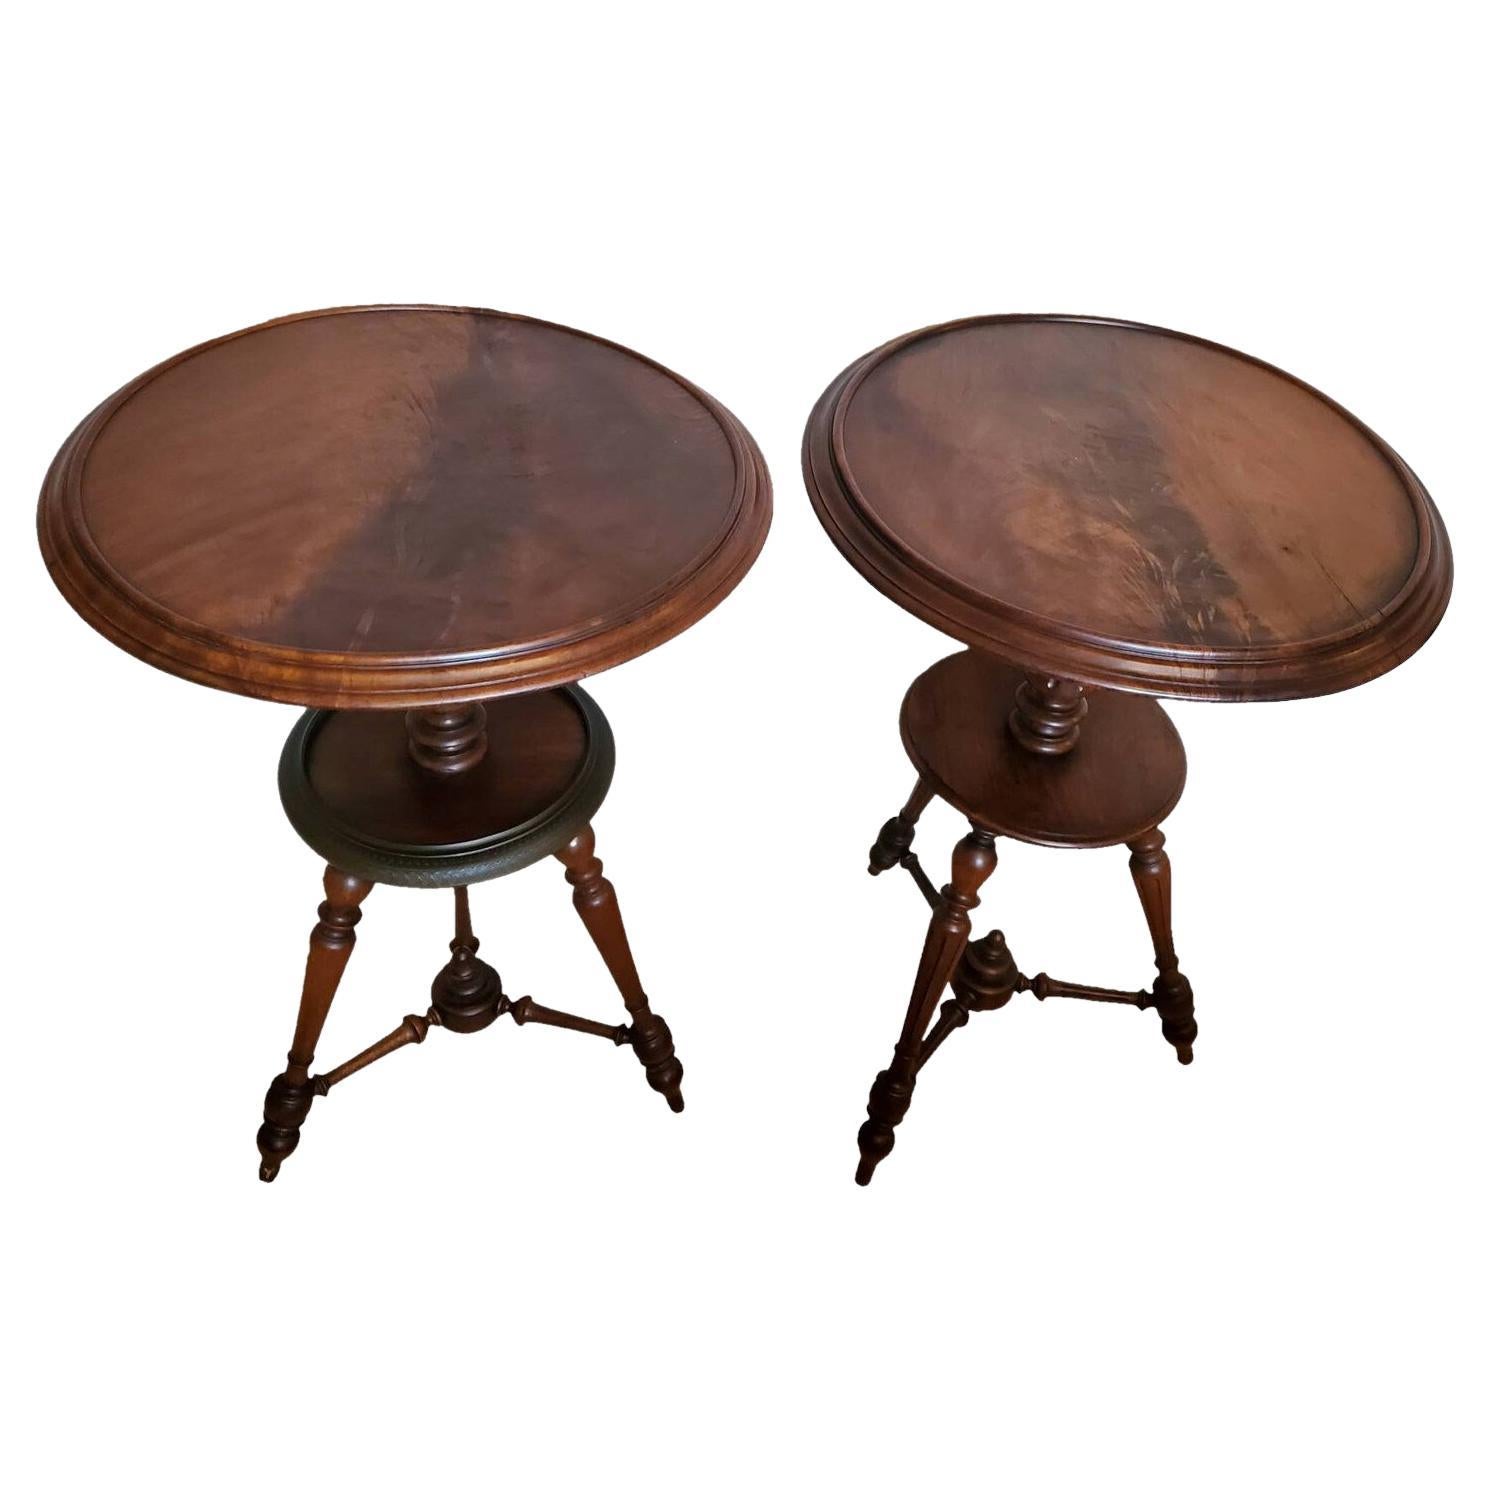 Rare French Antique Flame Mahogany Dish-Top Tea Table Pair For Sale